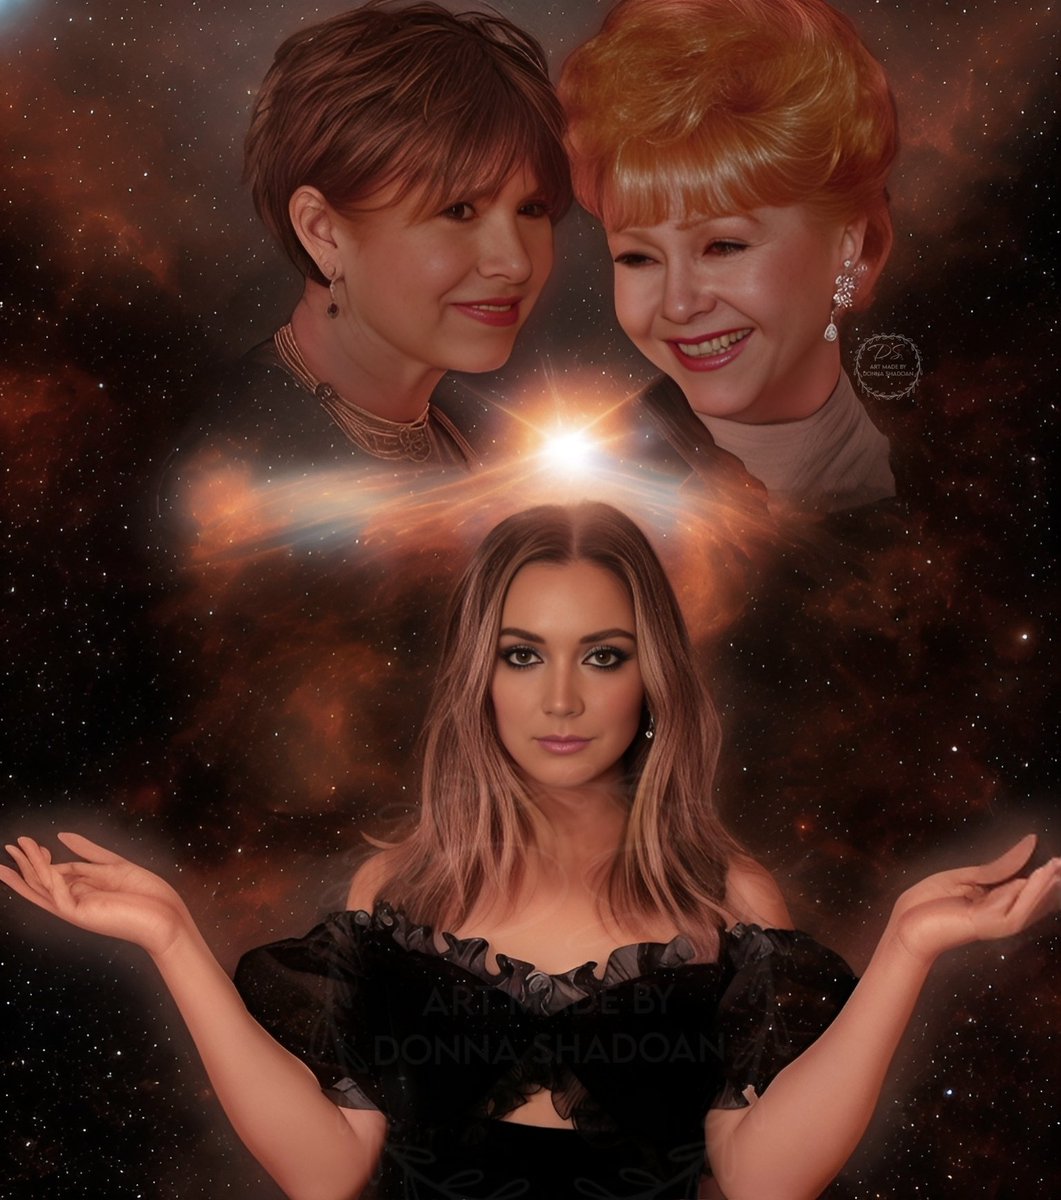 Billie Lourd I made you something and I hope you like it.  They are missed.  #debbiereynolds #carriefisher #billielourd #starwars #halloweentown  #miss #mom #grandmother #tribute #inlovingmemory @praisethelourd